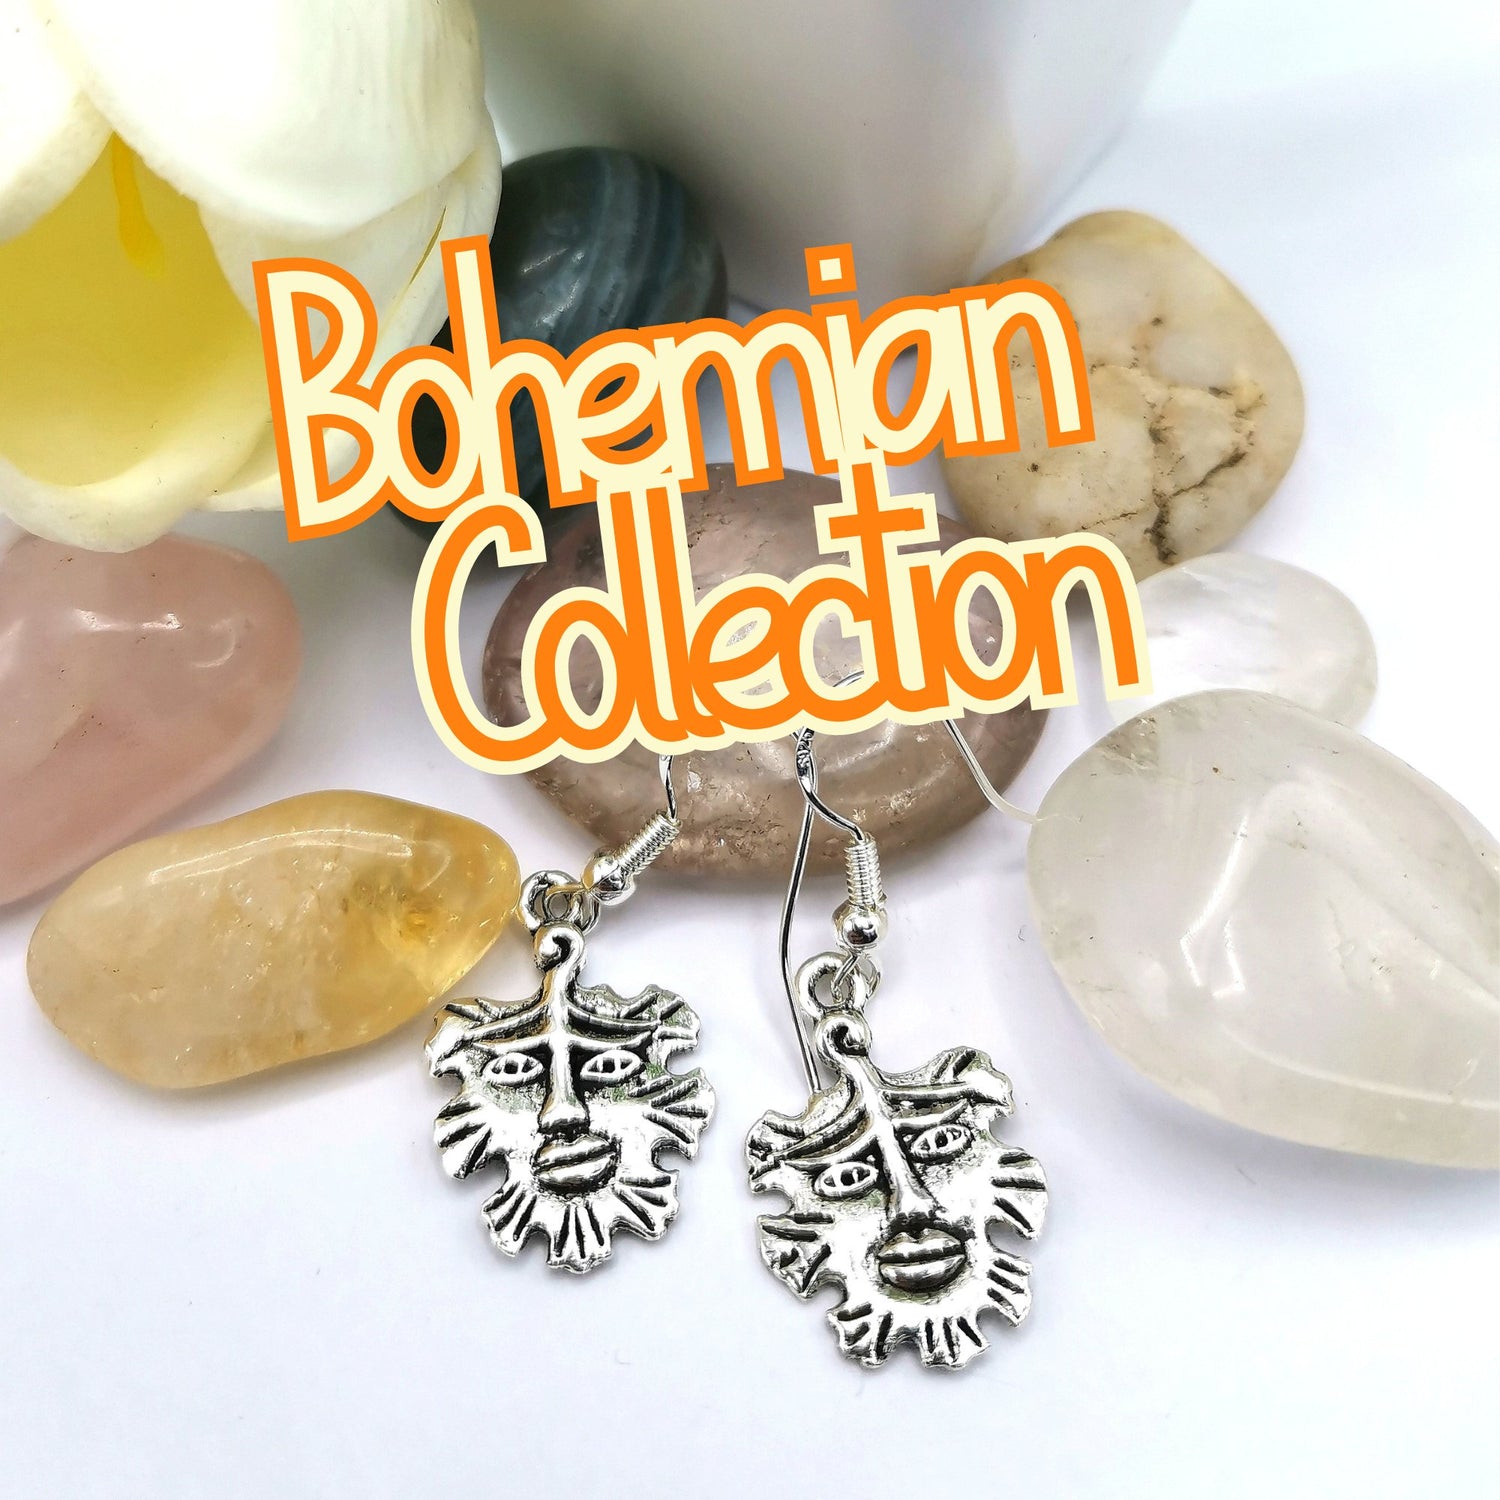 Hypoallergenic Bohemian Collection earrings. Crafted with sensitive skin in mind, our diverse designs ensure a worry-free and comfortable experience. Shop now for the perfect blend of affordability and style.